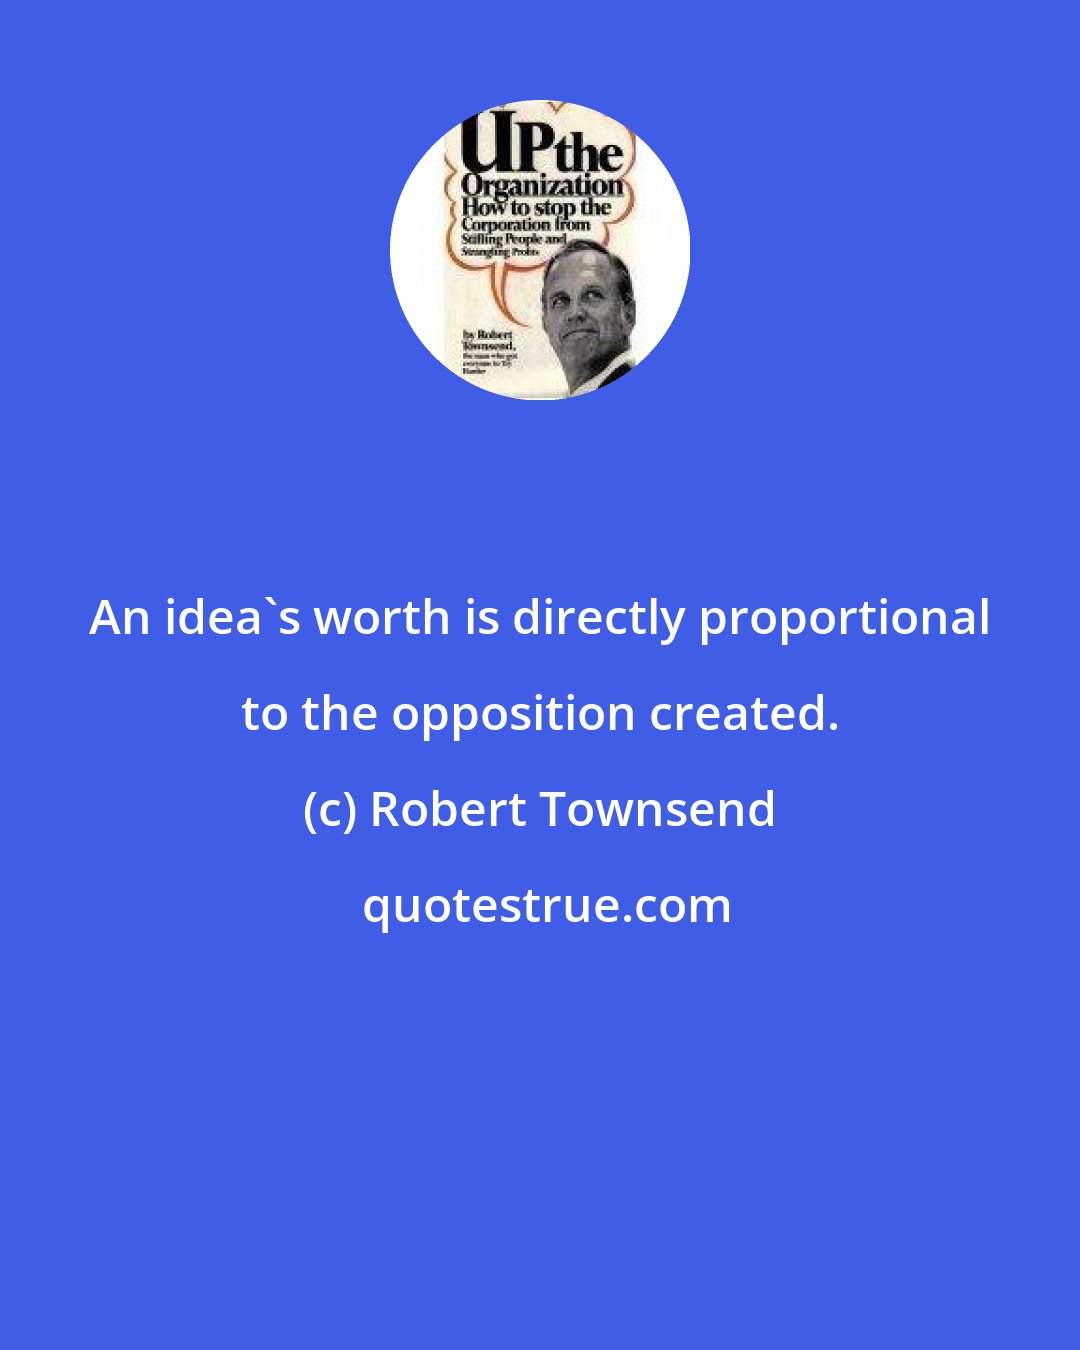 Robert Townsend: An idea's worth is directly proportional to the opposition created.